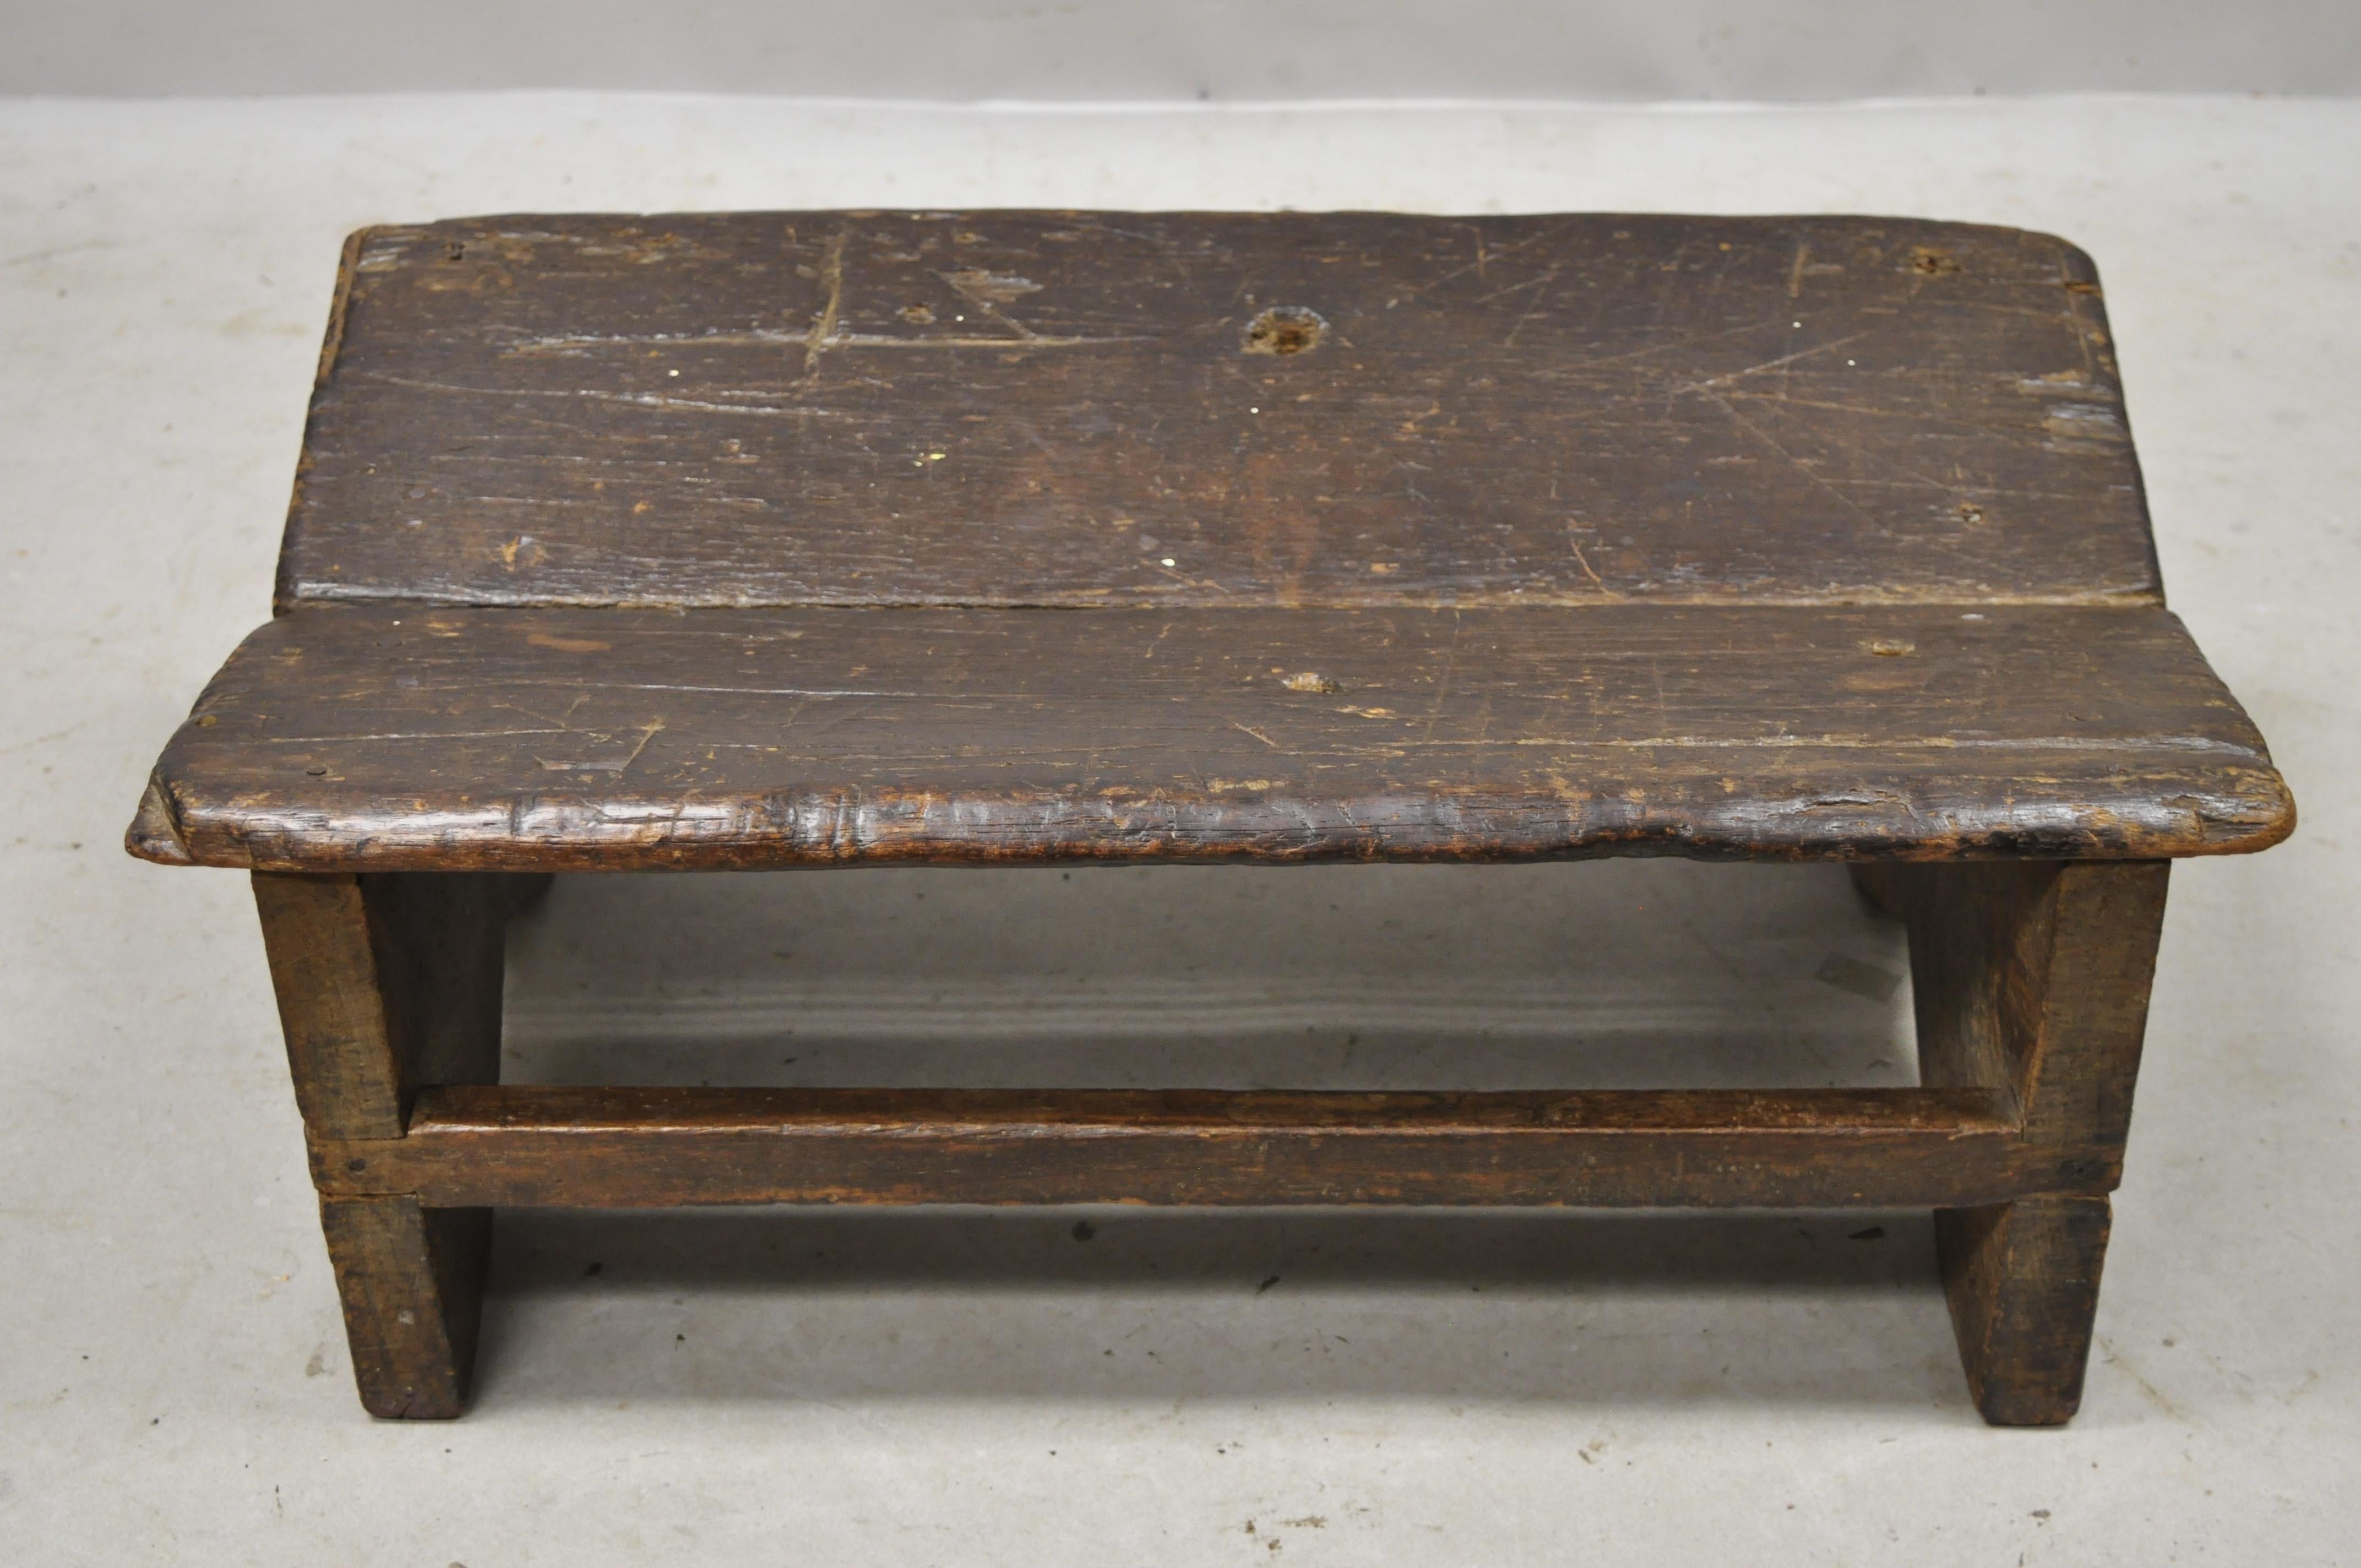 Antique Primitive Rustic French Country solid plank wood footstool stool ottoman. Item features dovetailed joinery, solid thick plank wood construction, beautiful wood grain, distressed finish, nicely carved details, very nice antique item, great